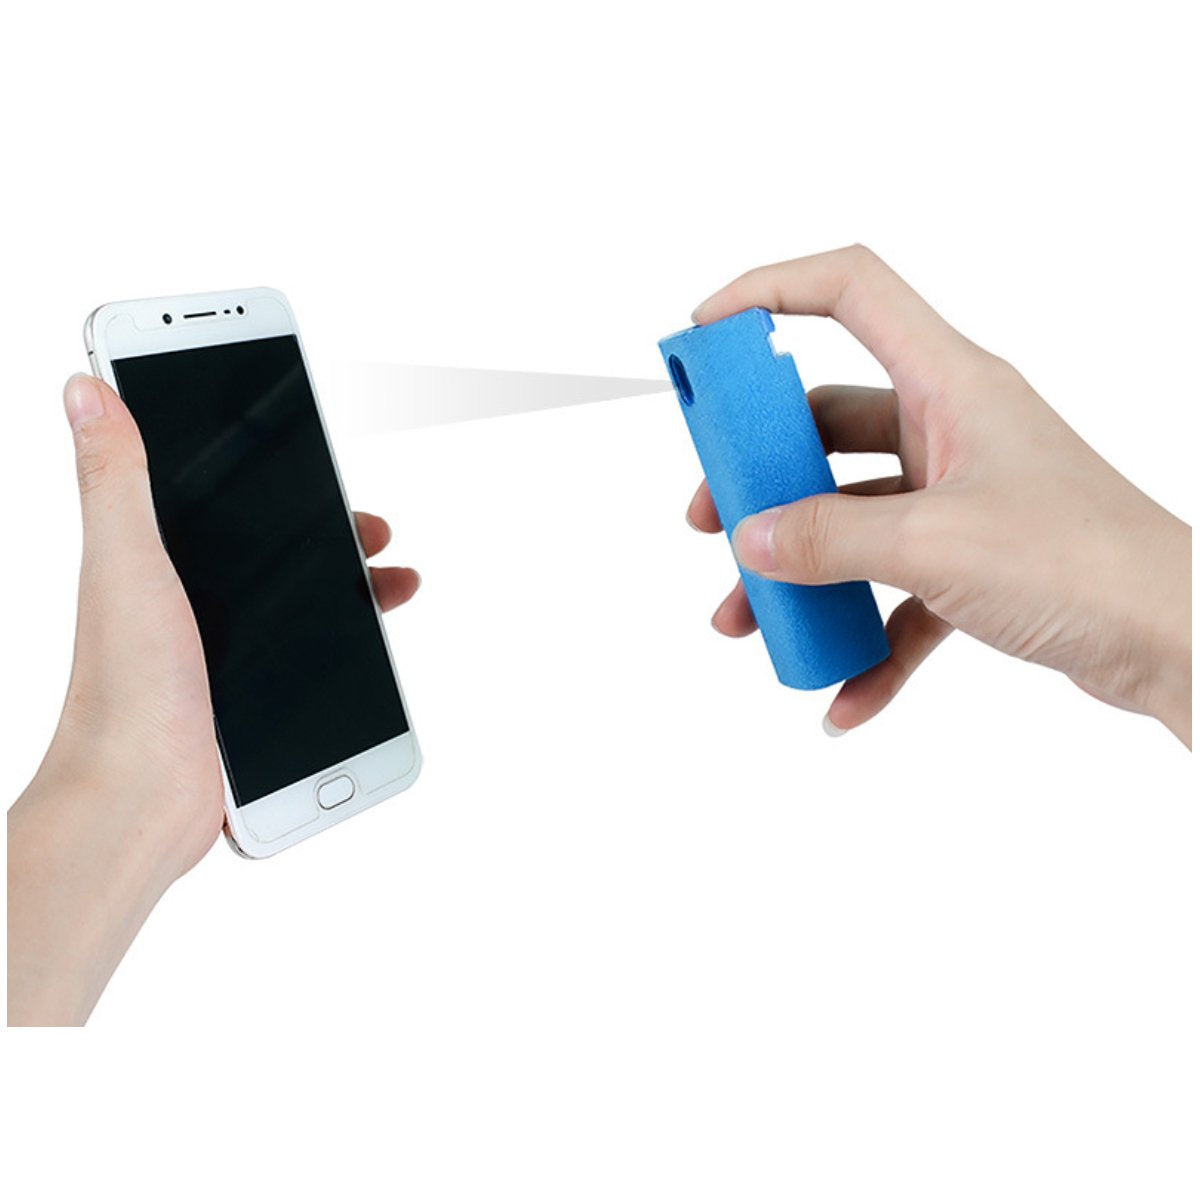 Phone Butler Spray Wipe Dry And Clean Phone - Tablets - Laptops